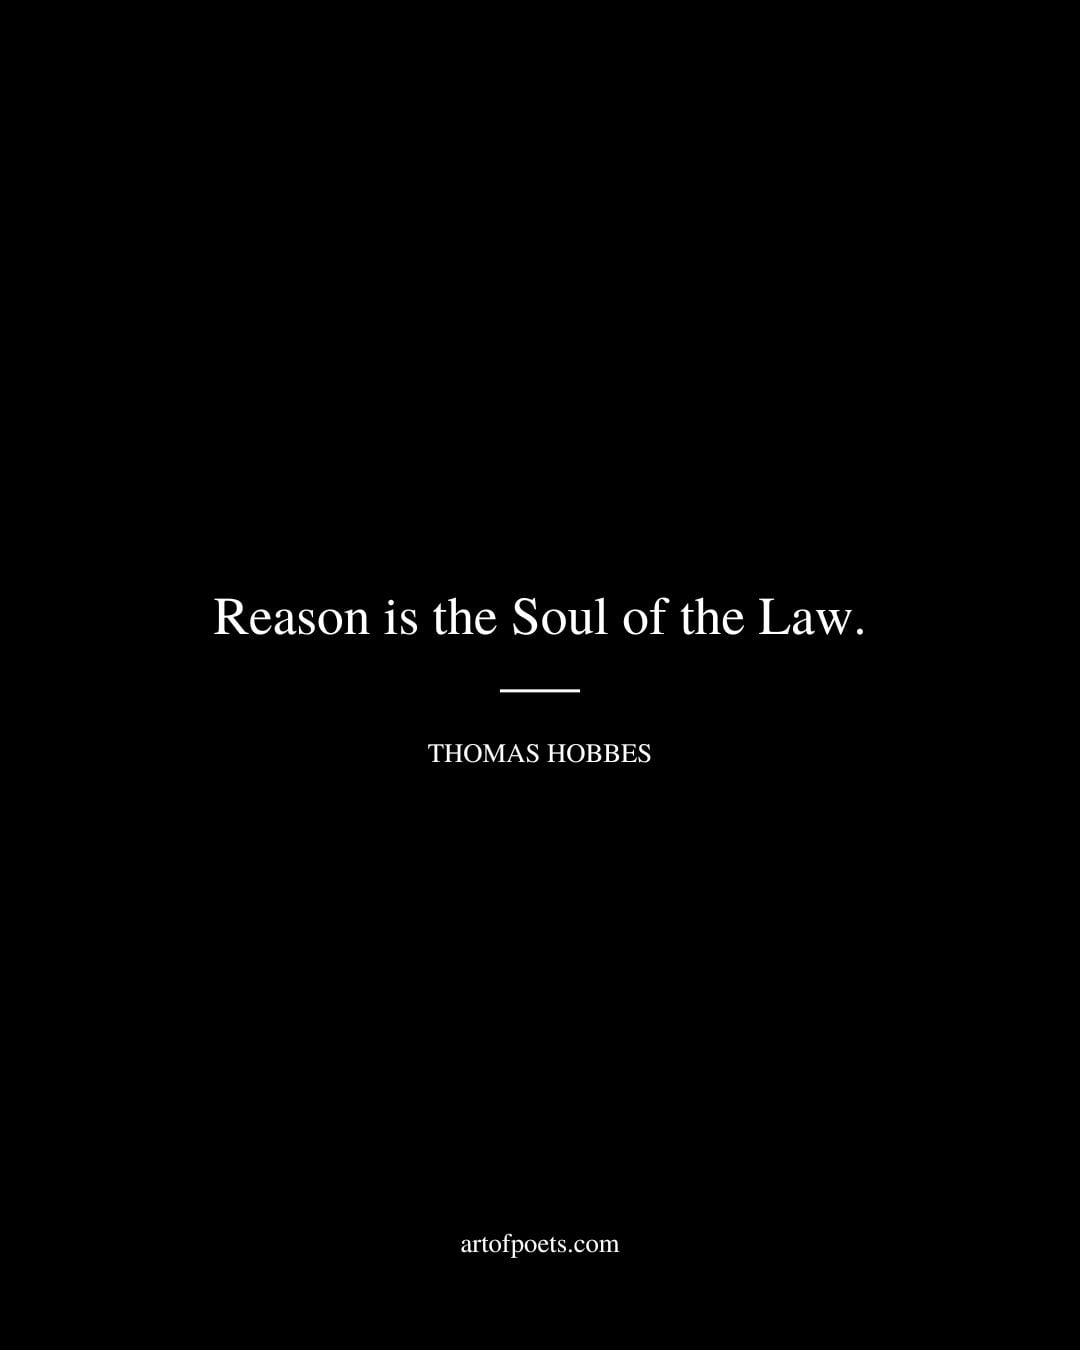 Reason is the Soul of the Law